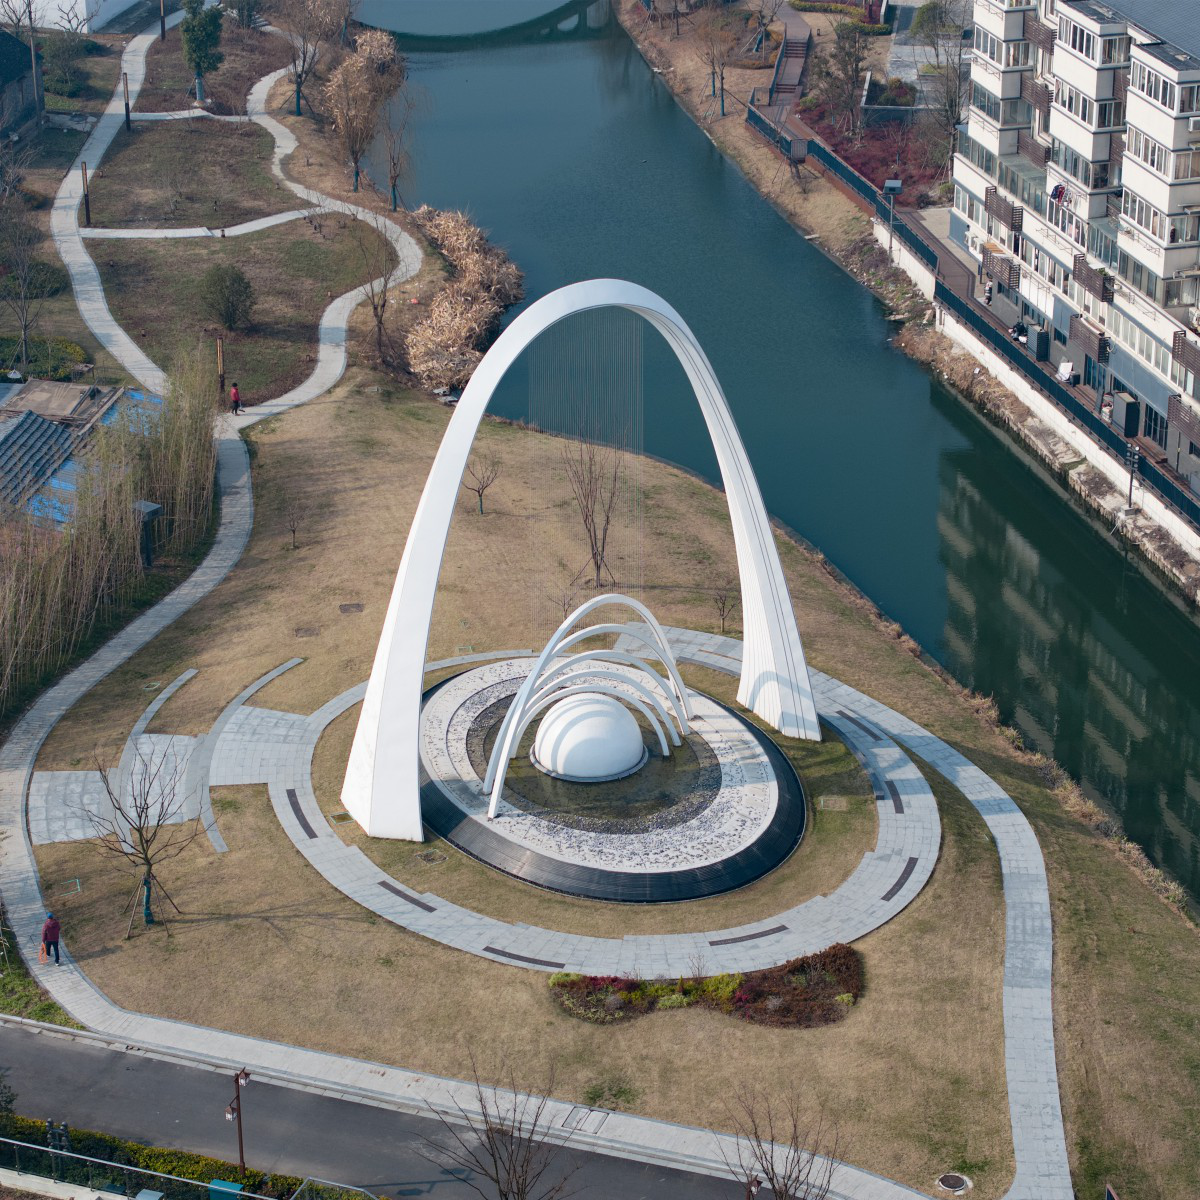 Yin Xiaofeng, Luo Wei wins Silver at the prestigious A' Landscape Planning and Garden Design Award with Skybow New Cultural Landmark.